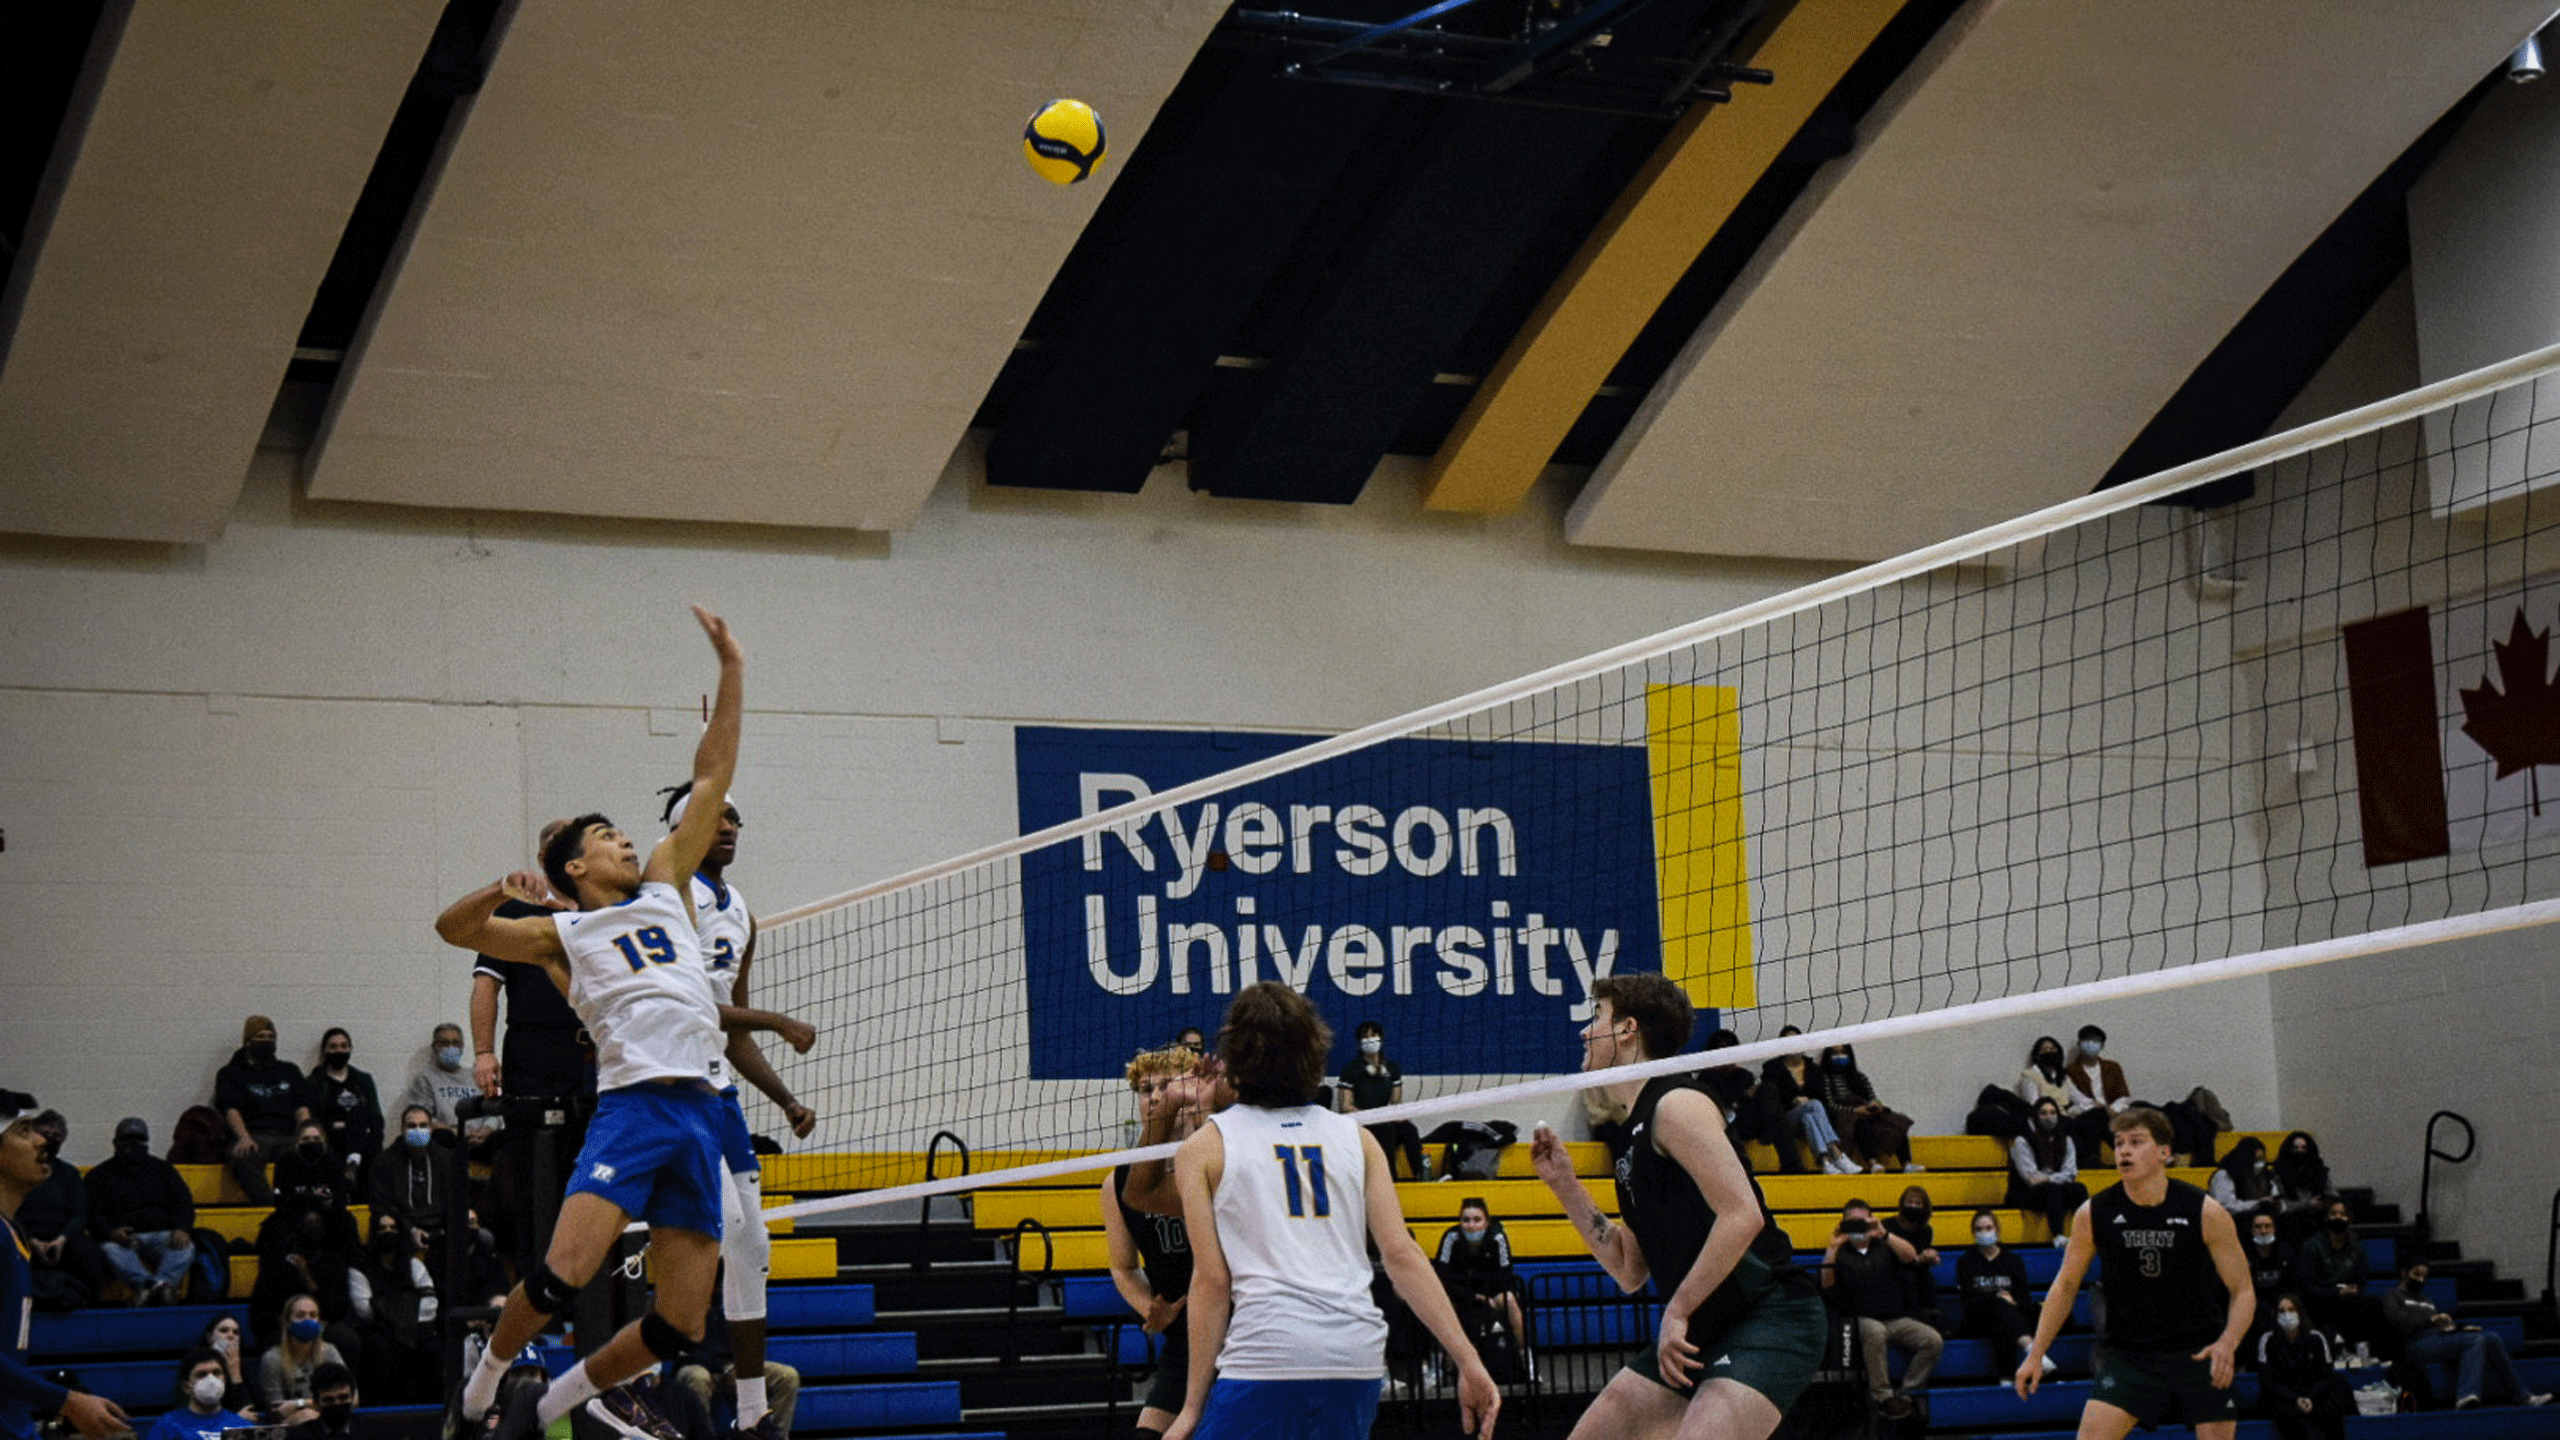 A Rams men's volleyball player in a white jersey flys through the air